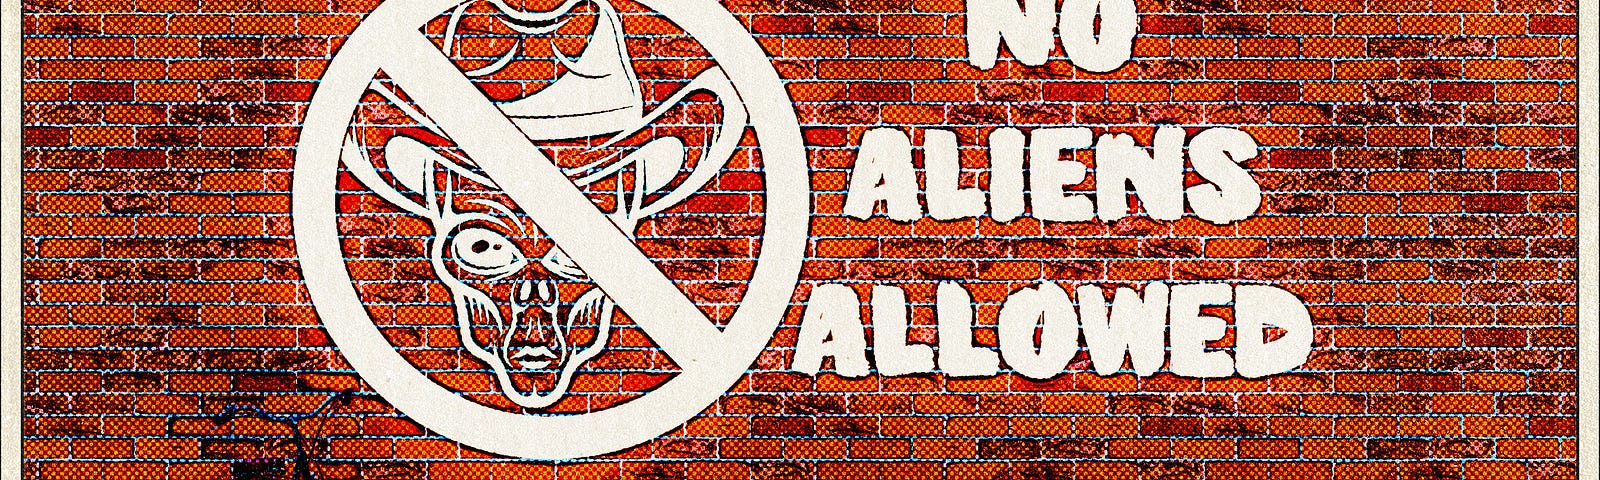 Wall painting: “No aliens allowed”